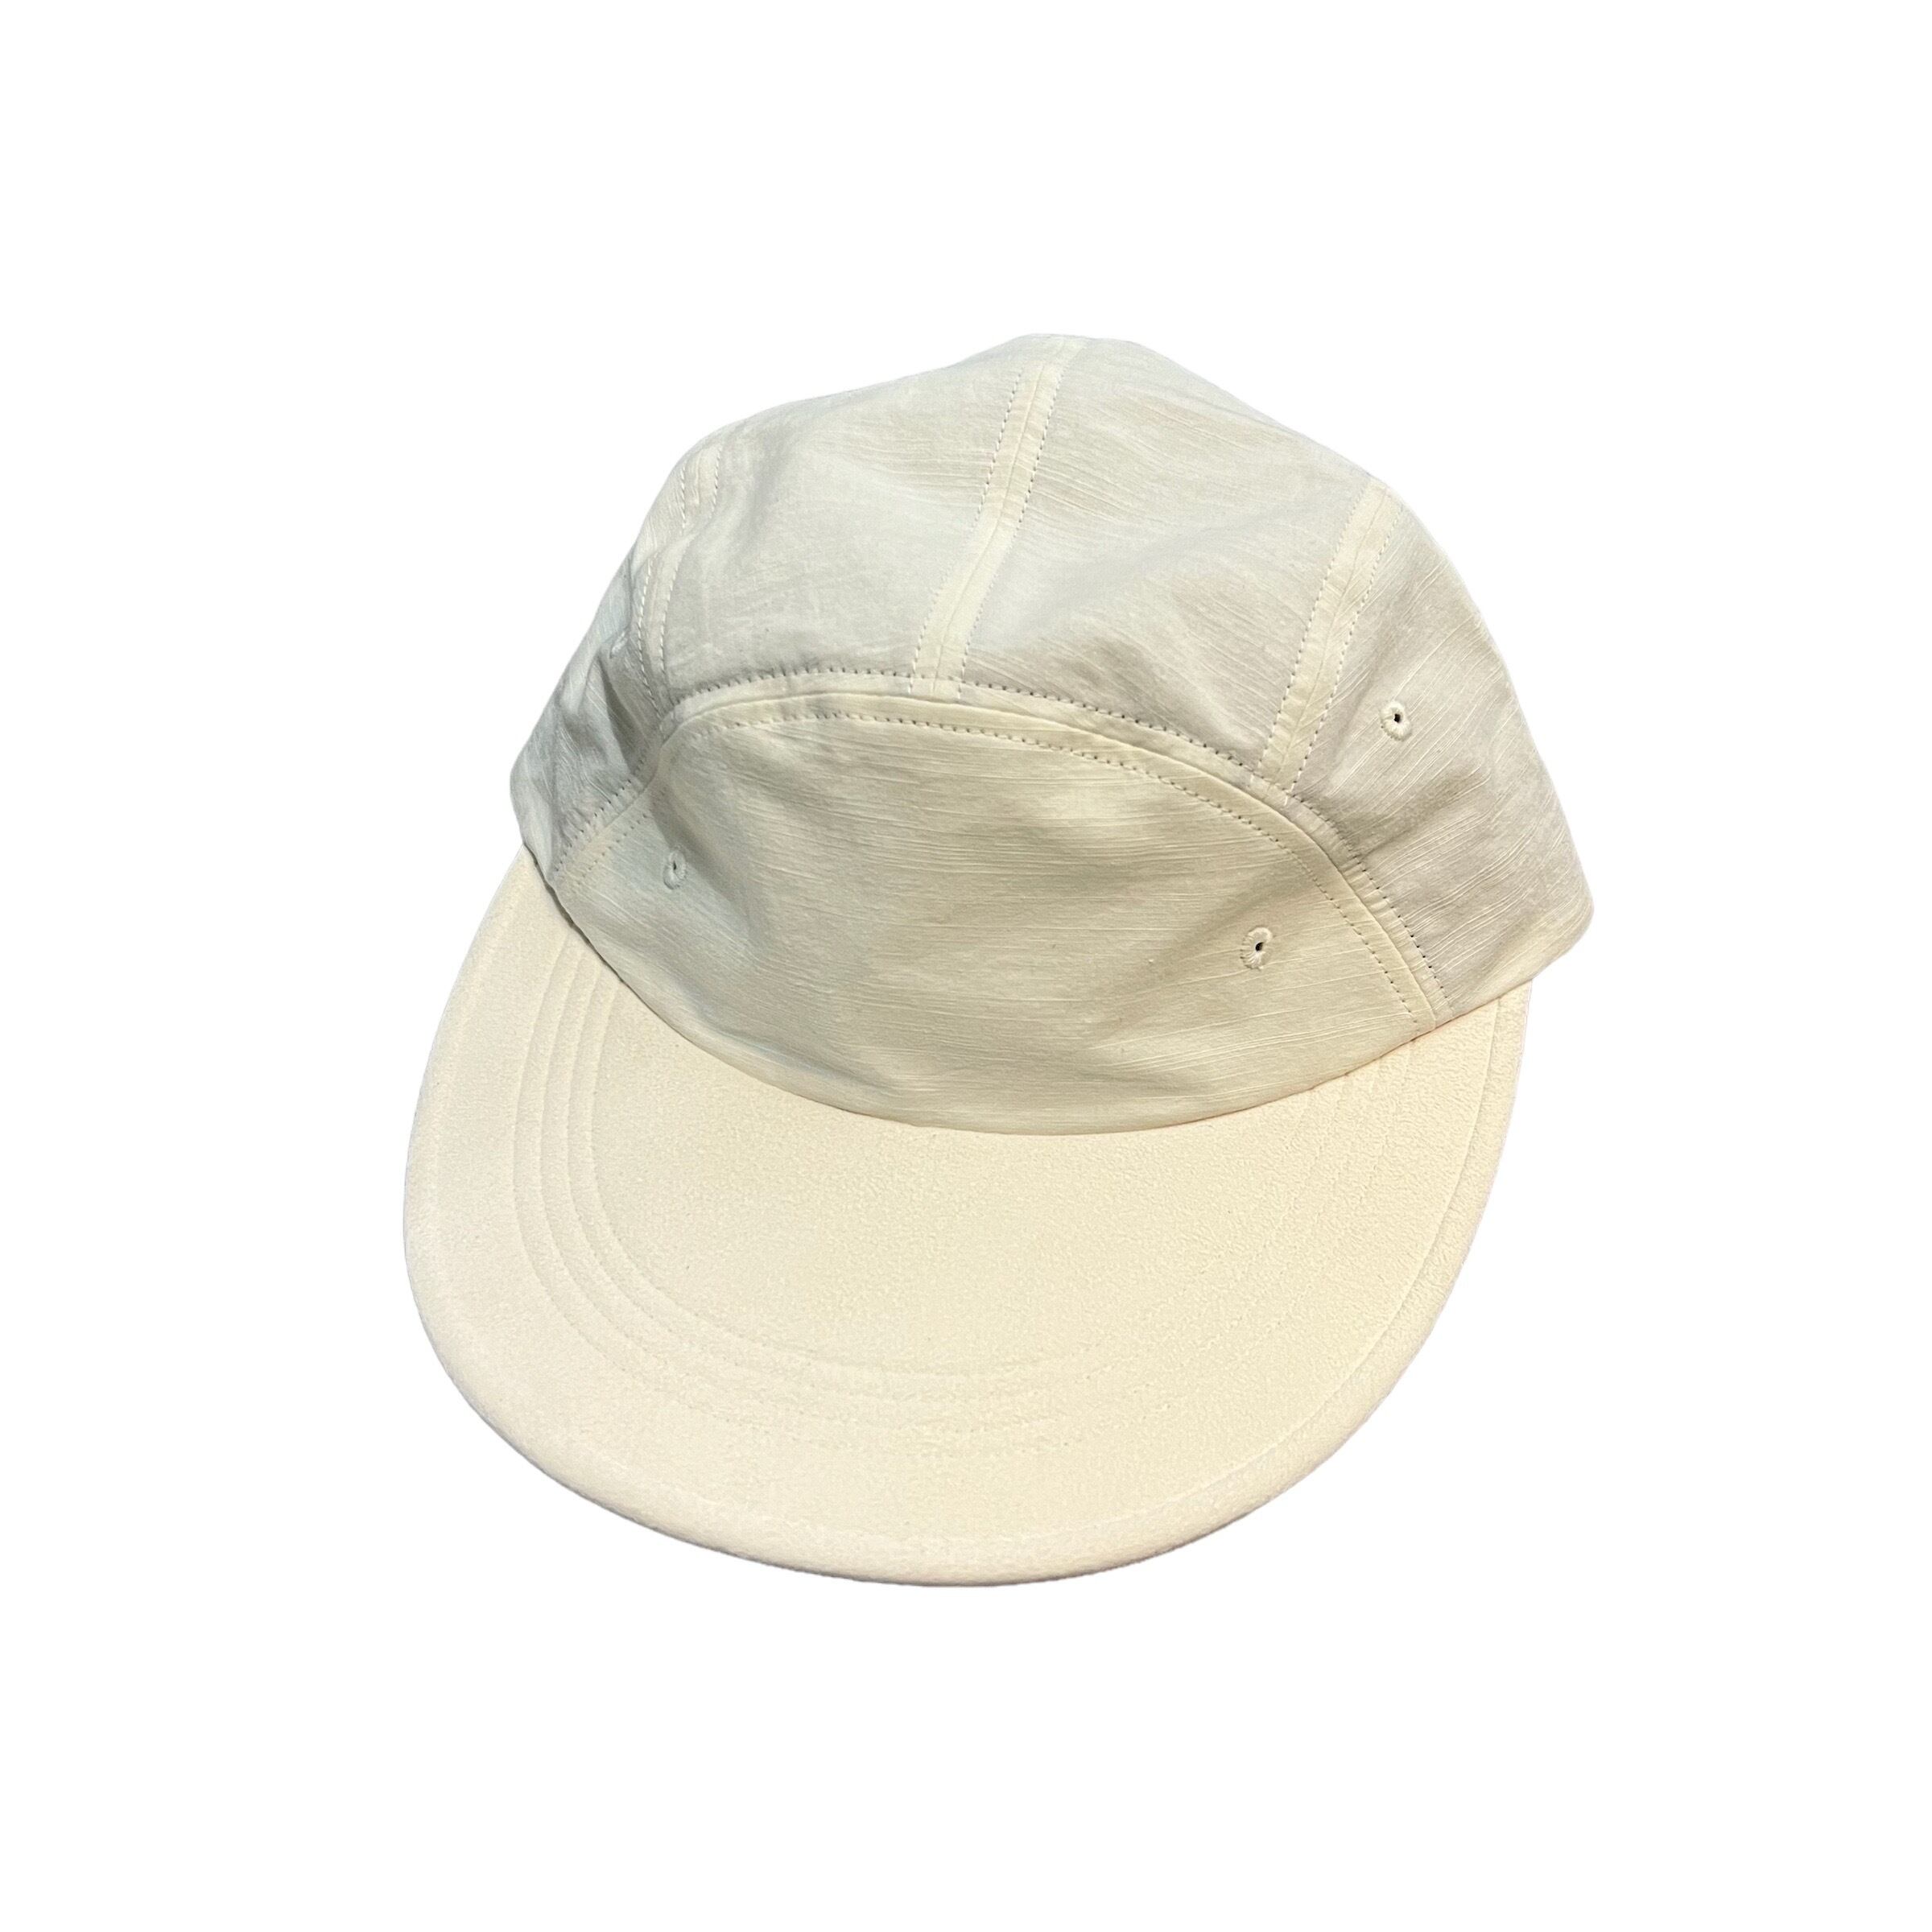 NOROLL / HONK CAP WHITE | THE NEWAGE CLUB powered by BASE